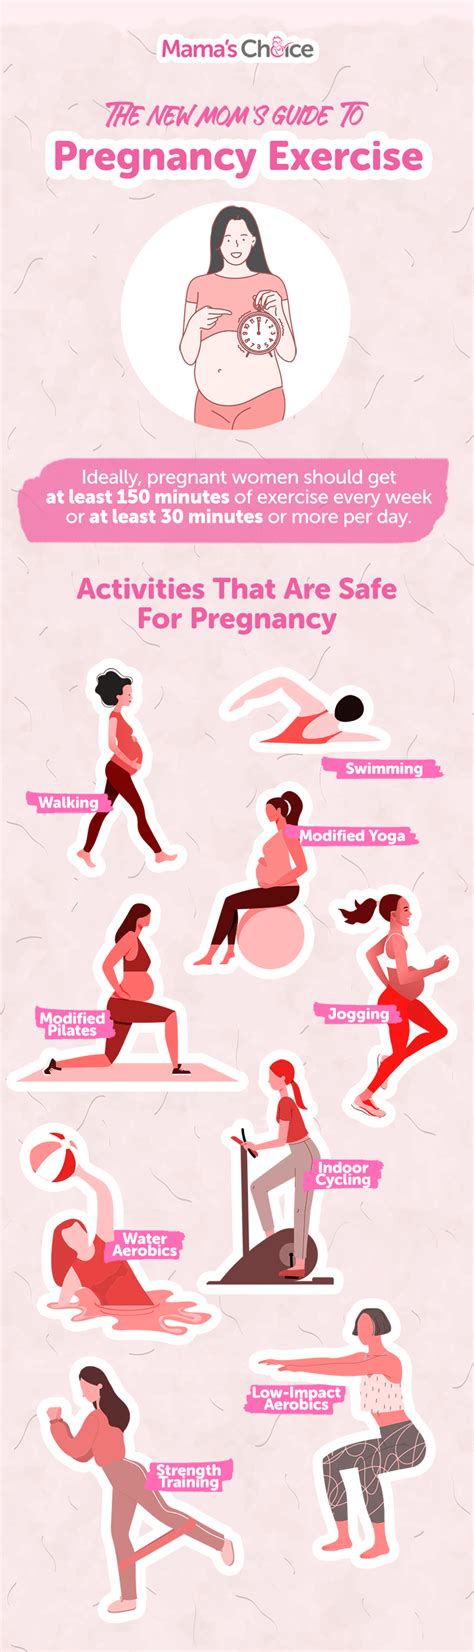 Exercise In Pregnancy The Safe Workouts For Every Trimester